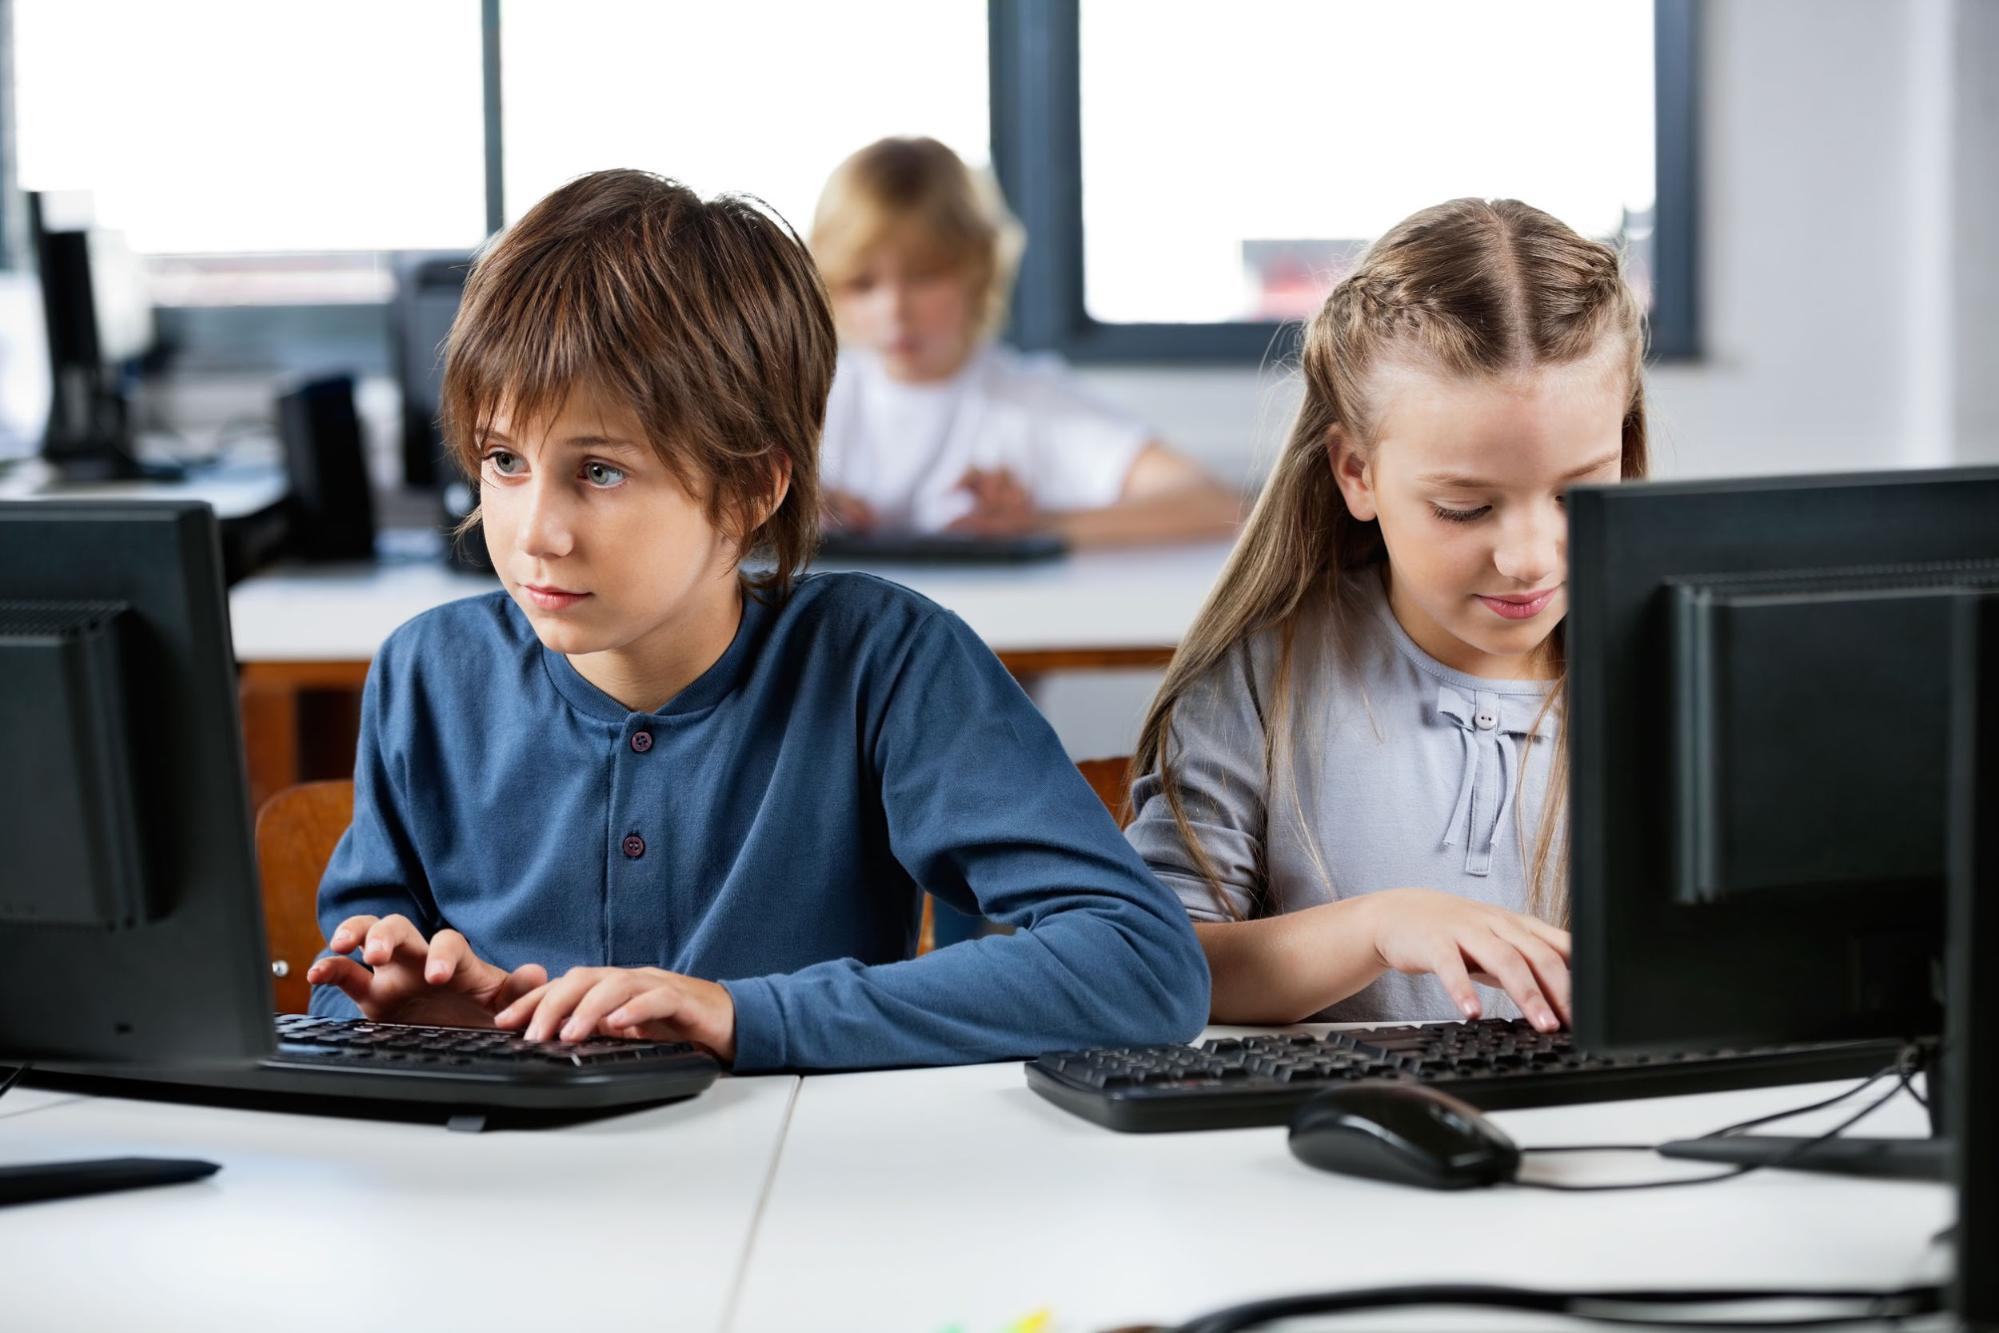 Digital Device Rules: Classroom Guidelines for Balanced Tech Use